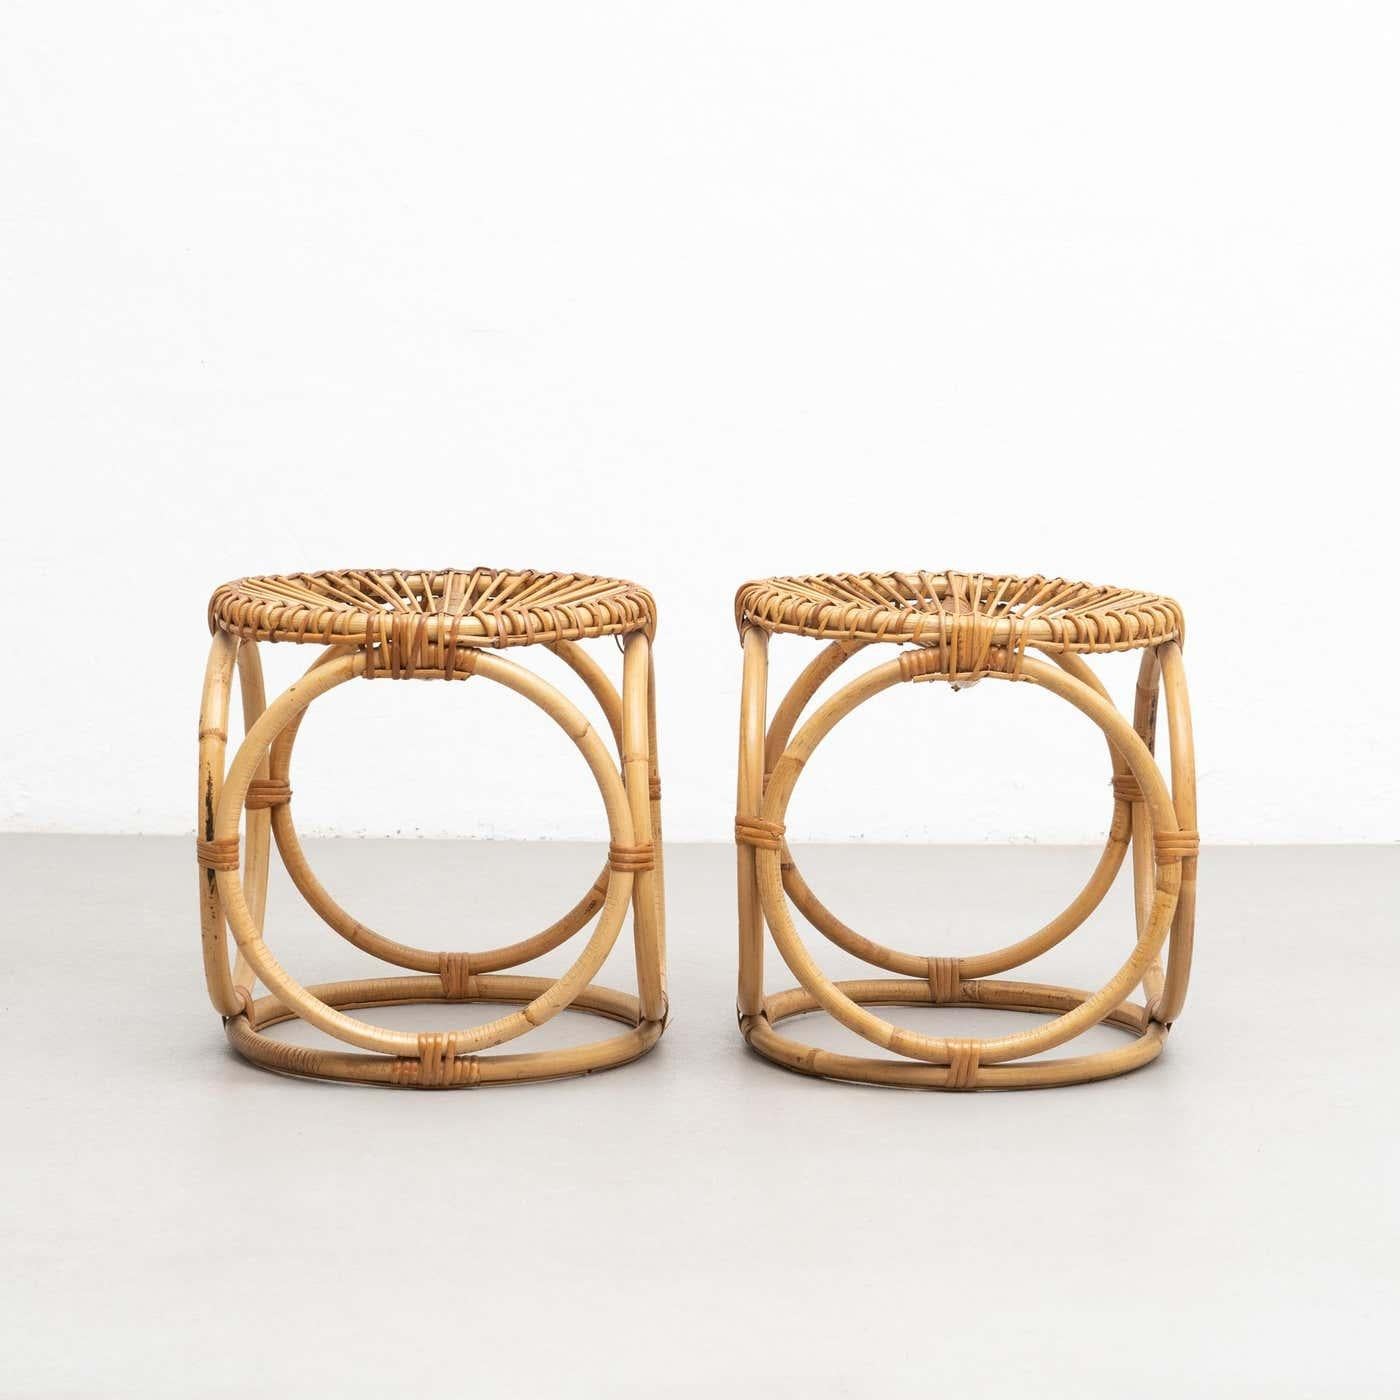 Mid-Century Modern pair of bamboo and rattan handcrafted stools , circa 1960.

Traditionally manufactured in France.

By unknown designer.

In original condition with minor wear consistent of age and use, preserving a beautiful patina.

